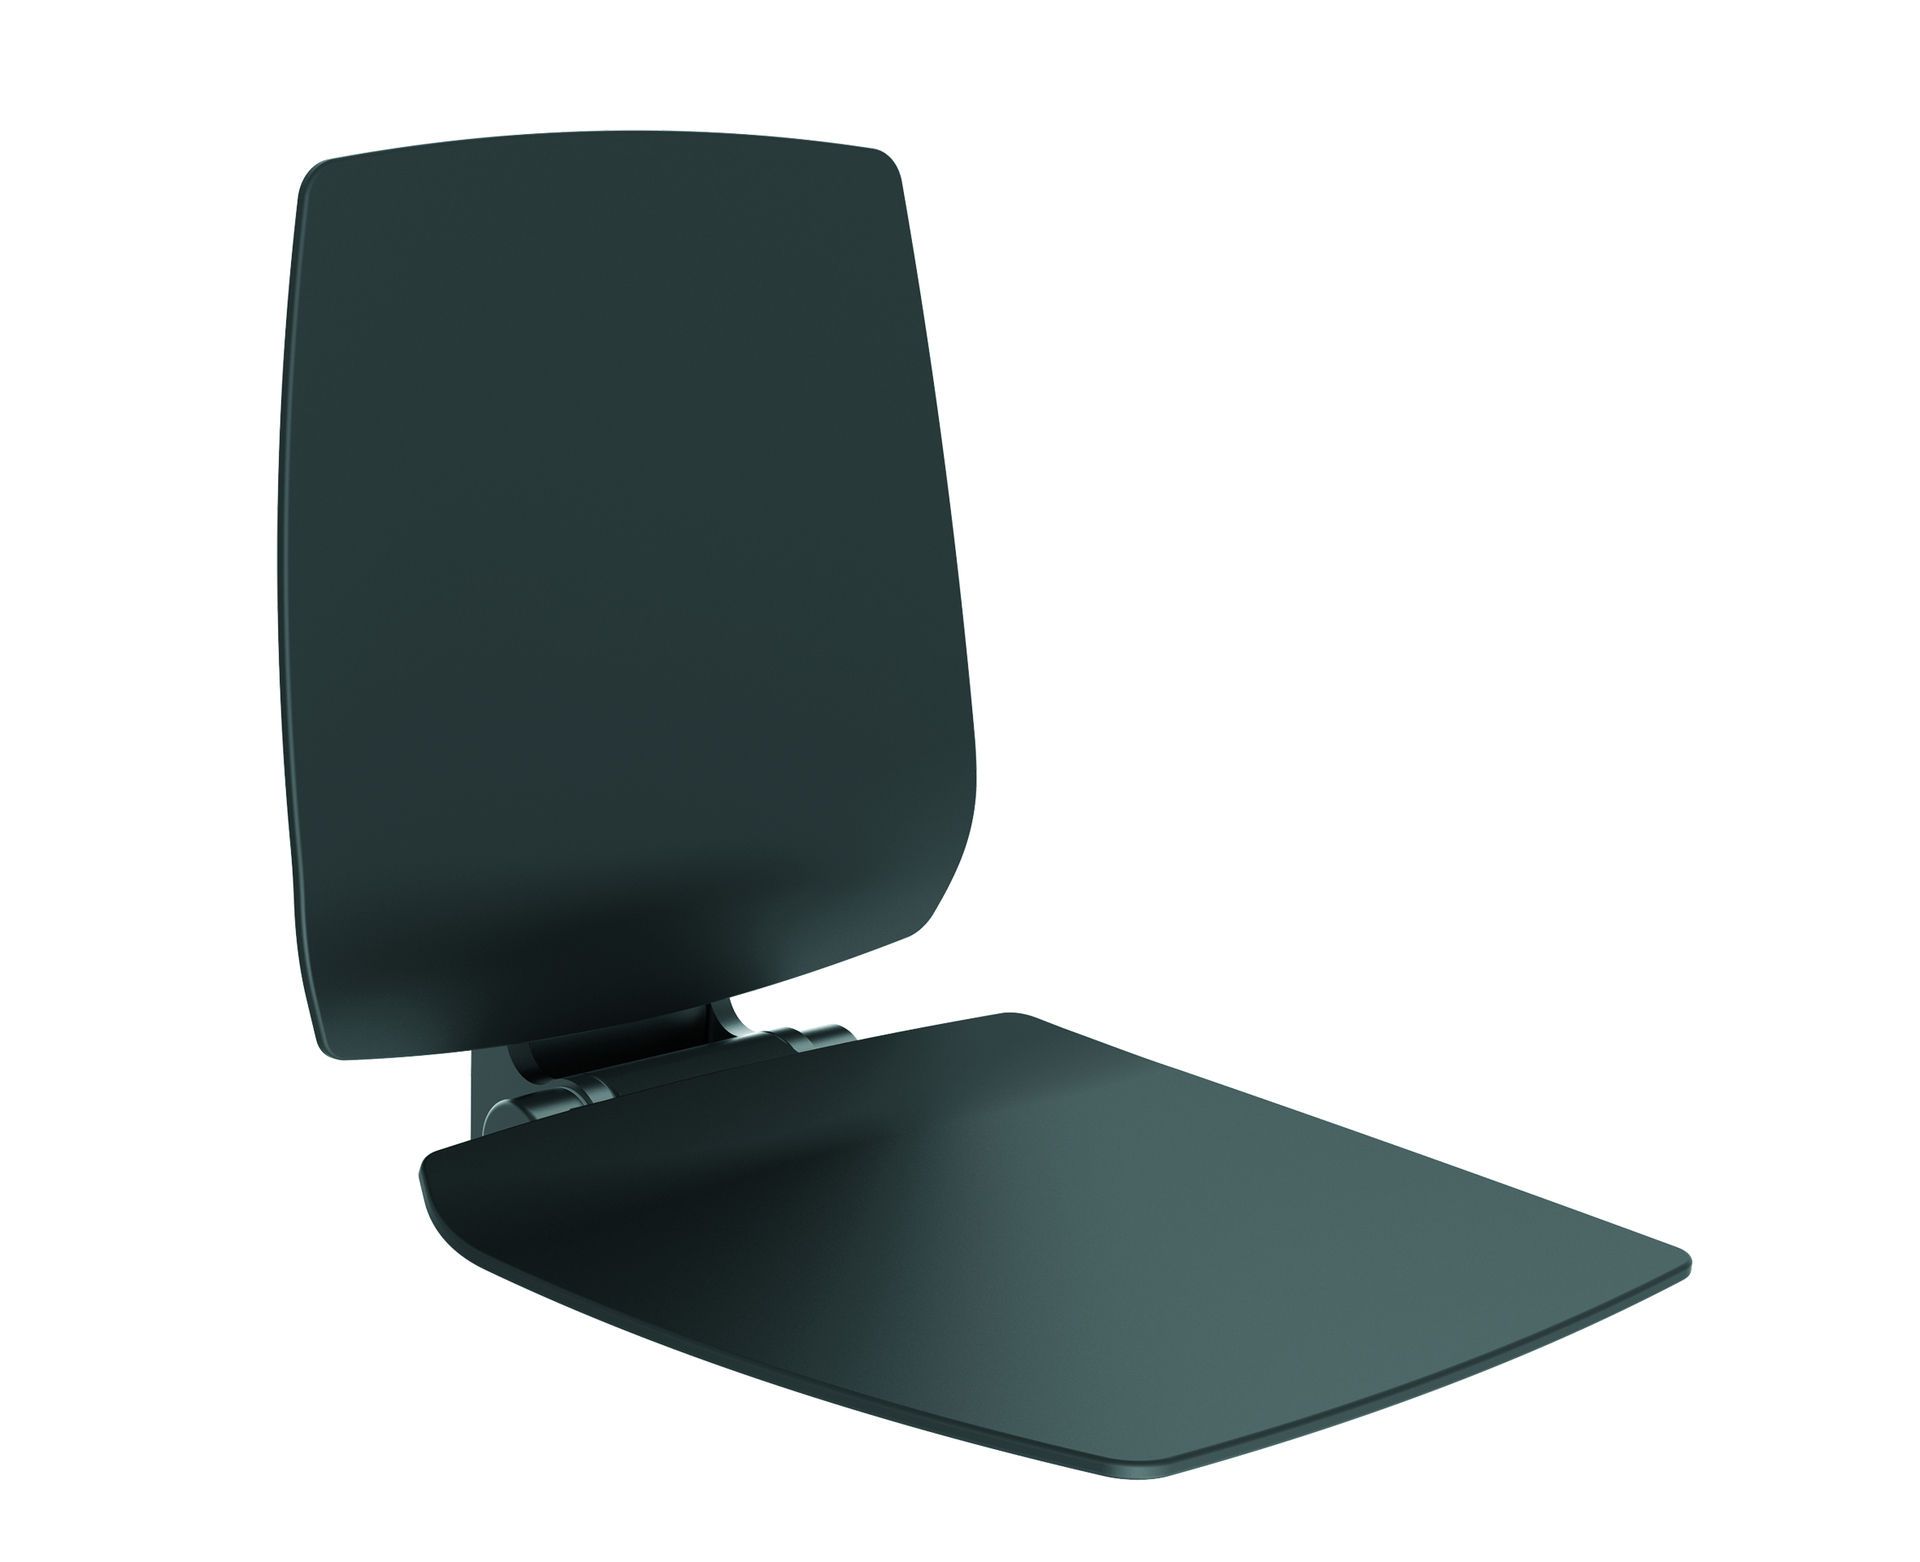 Ascento seat and backrest